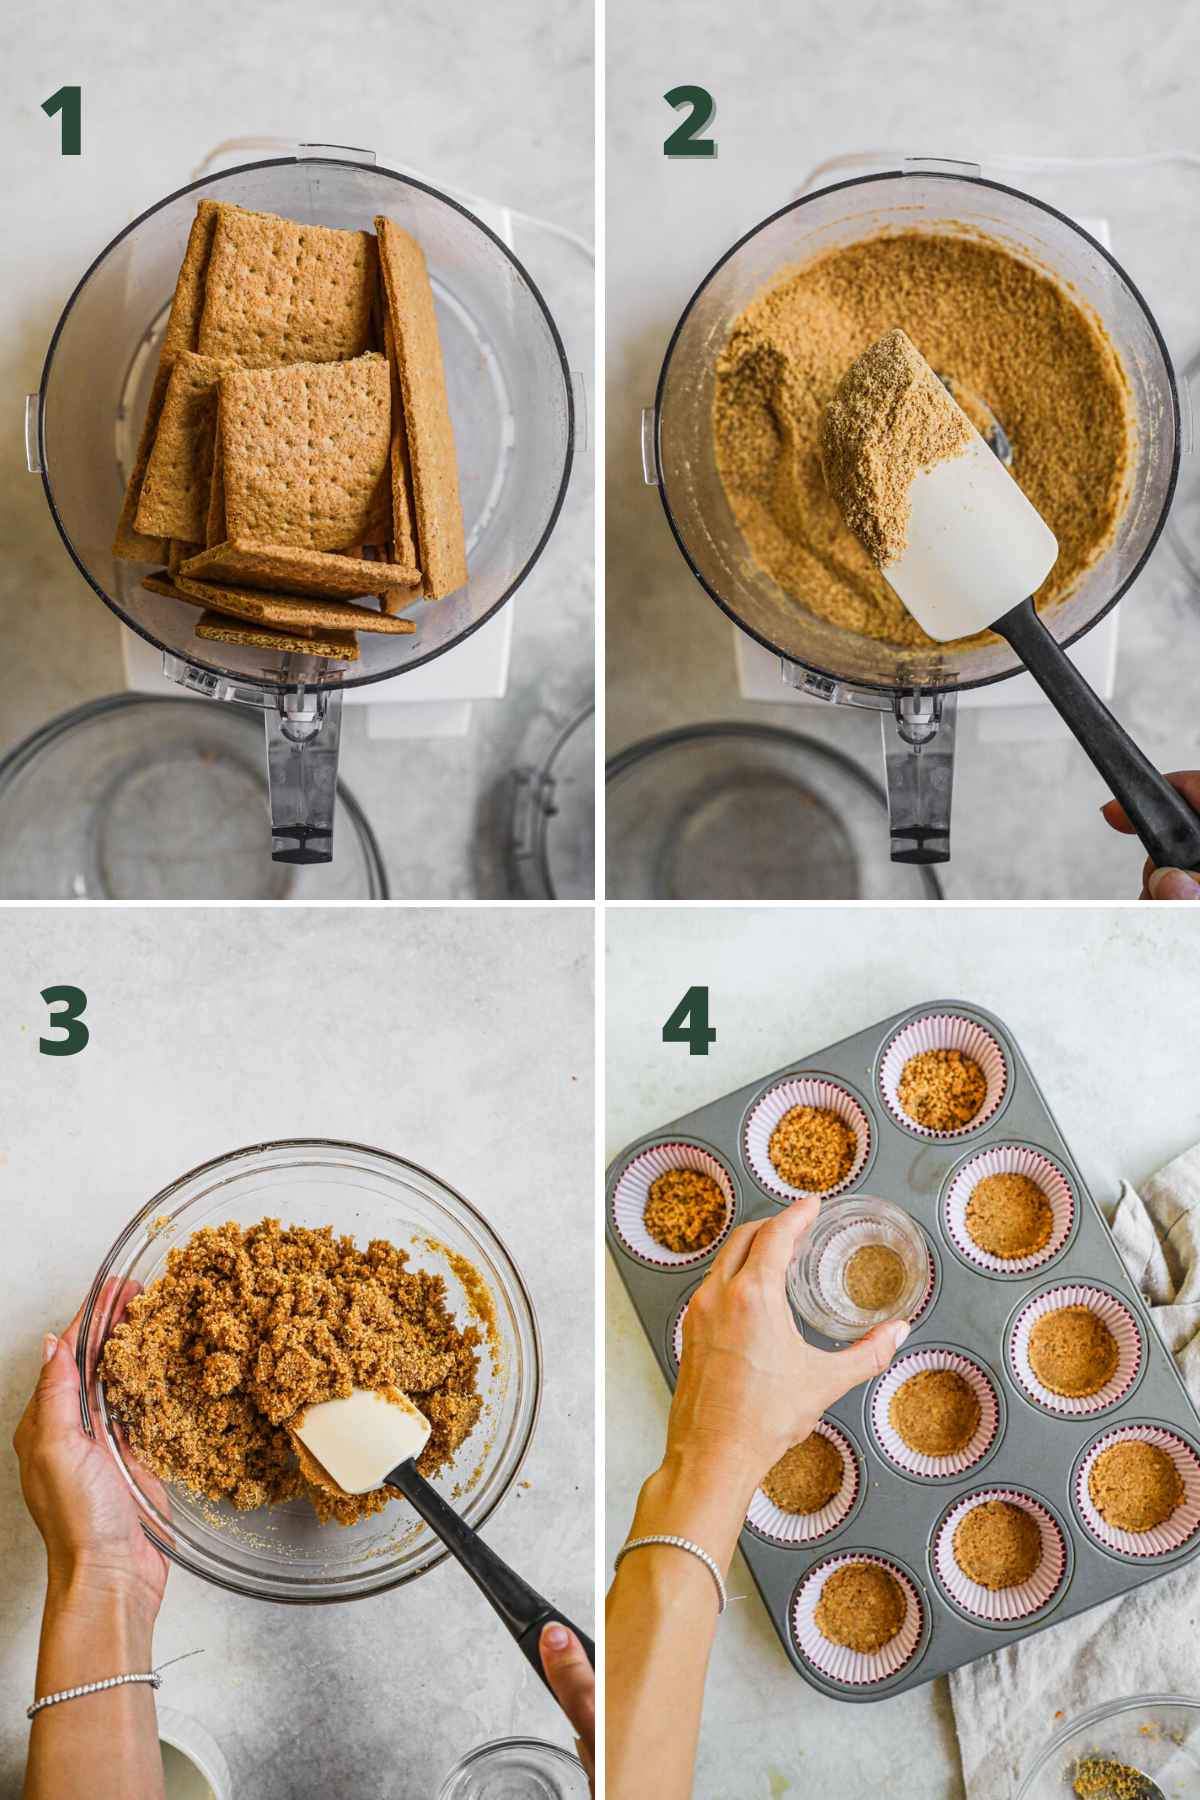 Steps to make no bake mini cheesecakes, make graham cracker crumbs in food processor, mix crumbs with butter and sugar, then press into cupcake liners.